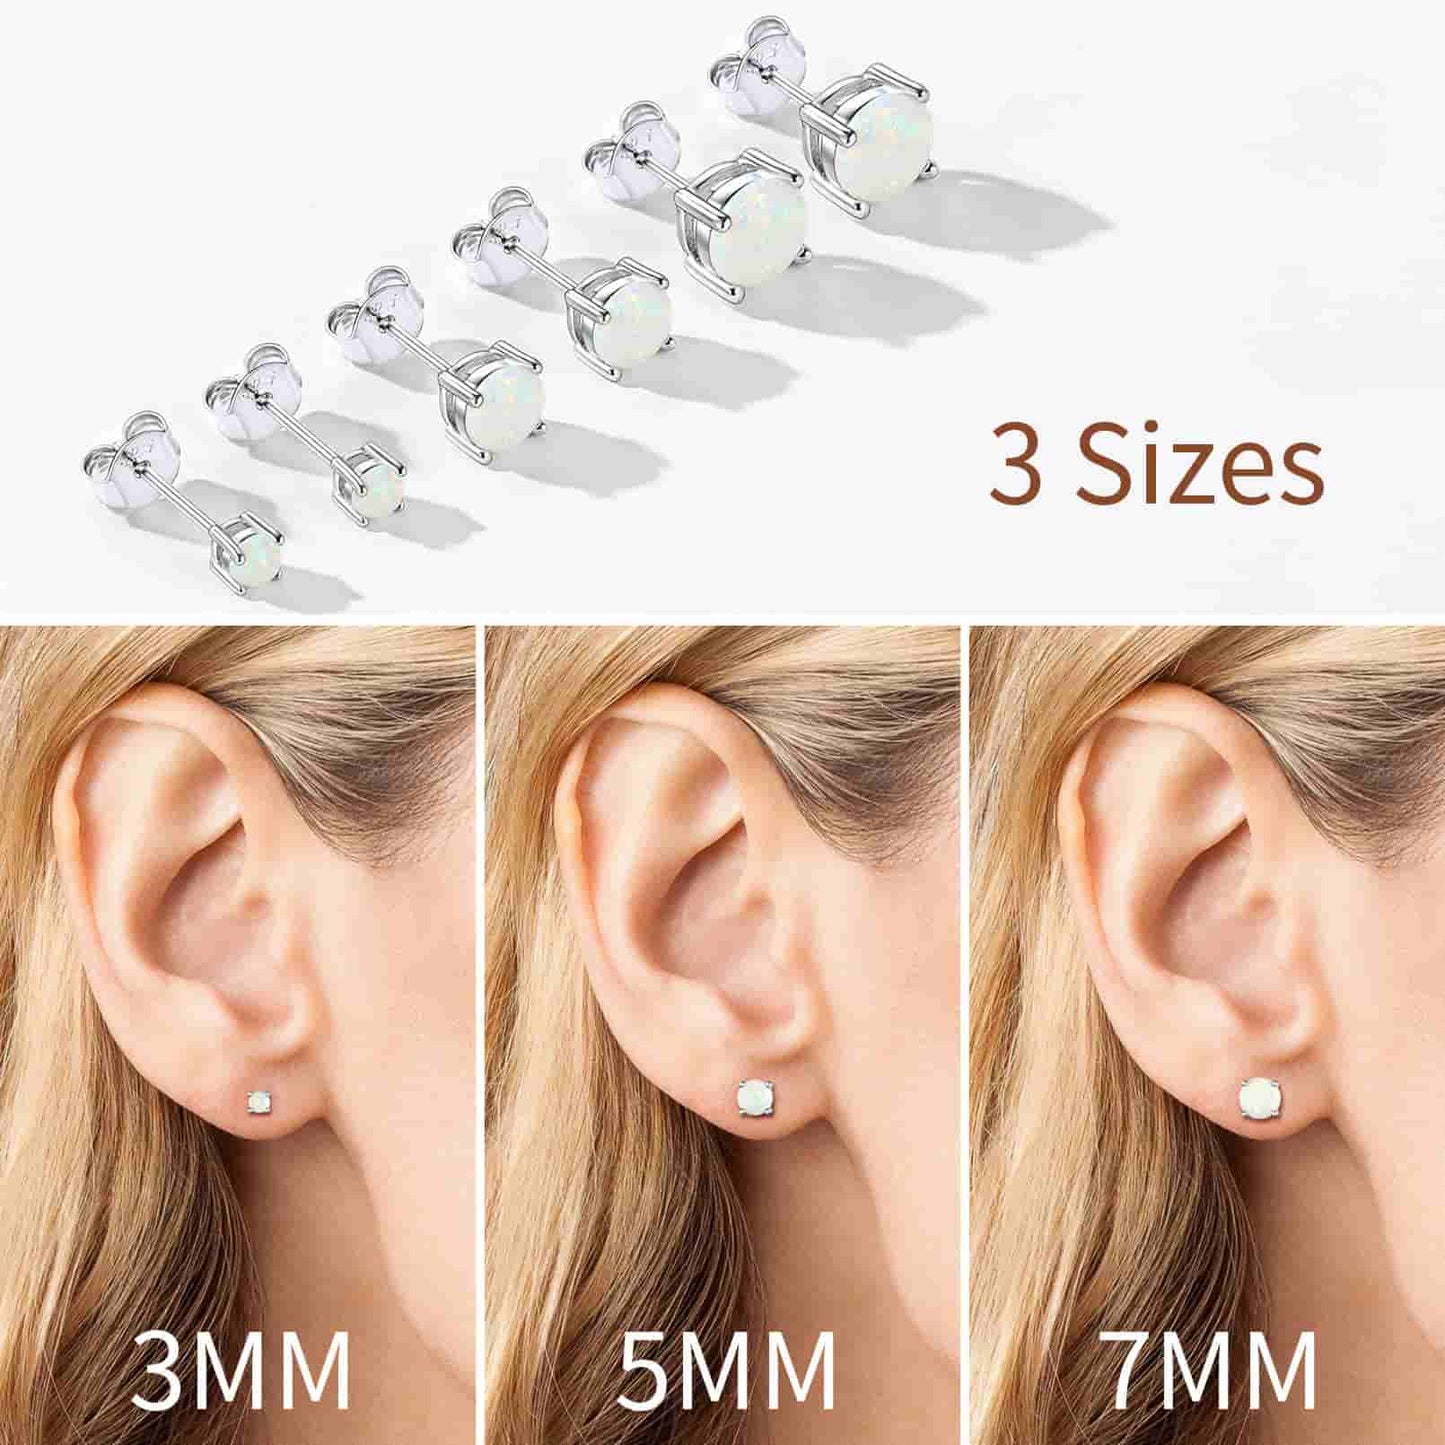 Classic Round Opal Stud Earrings Sterling Silver